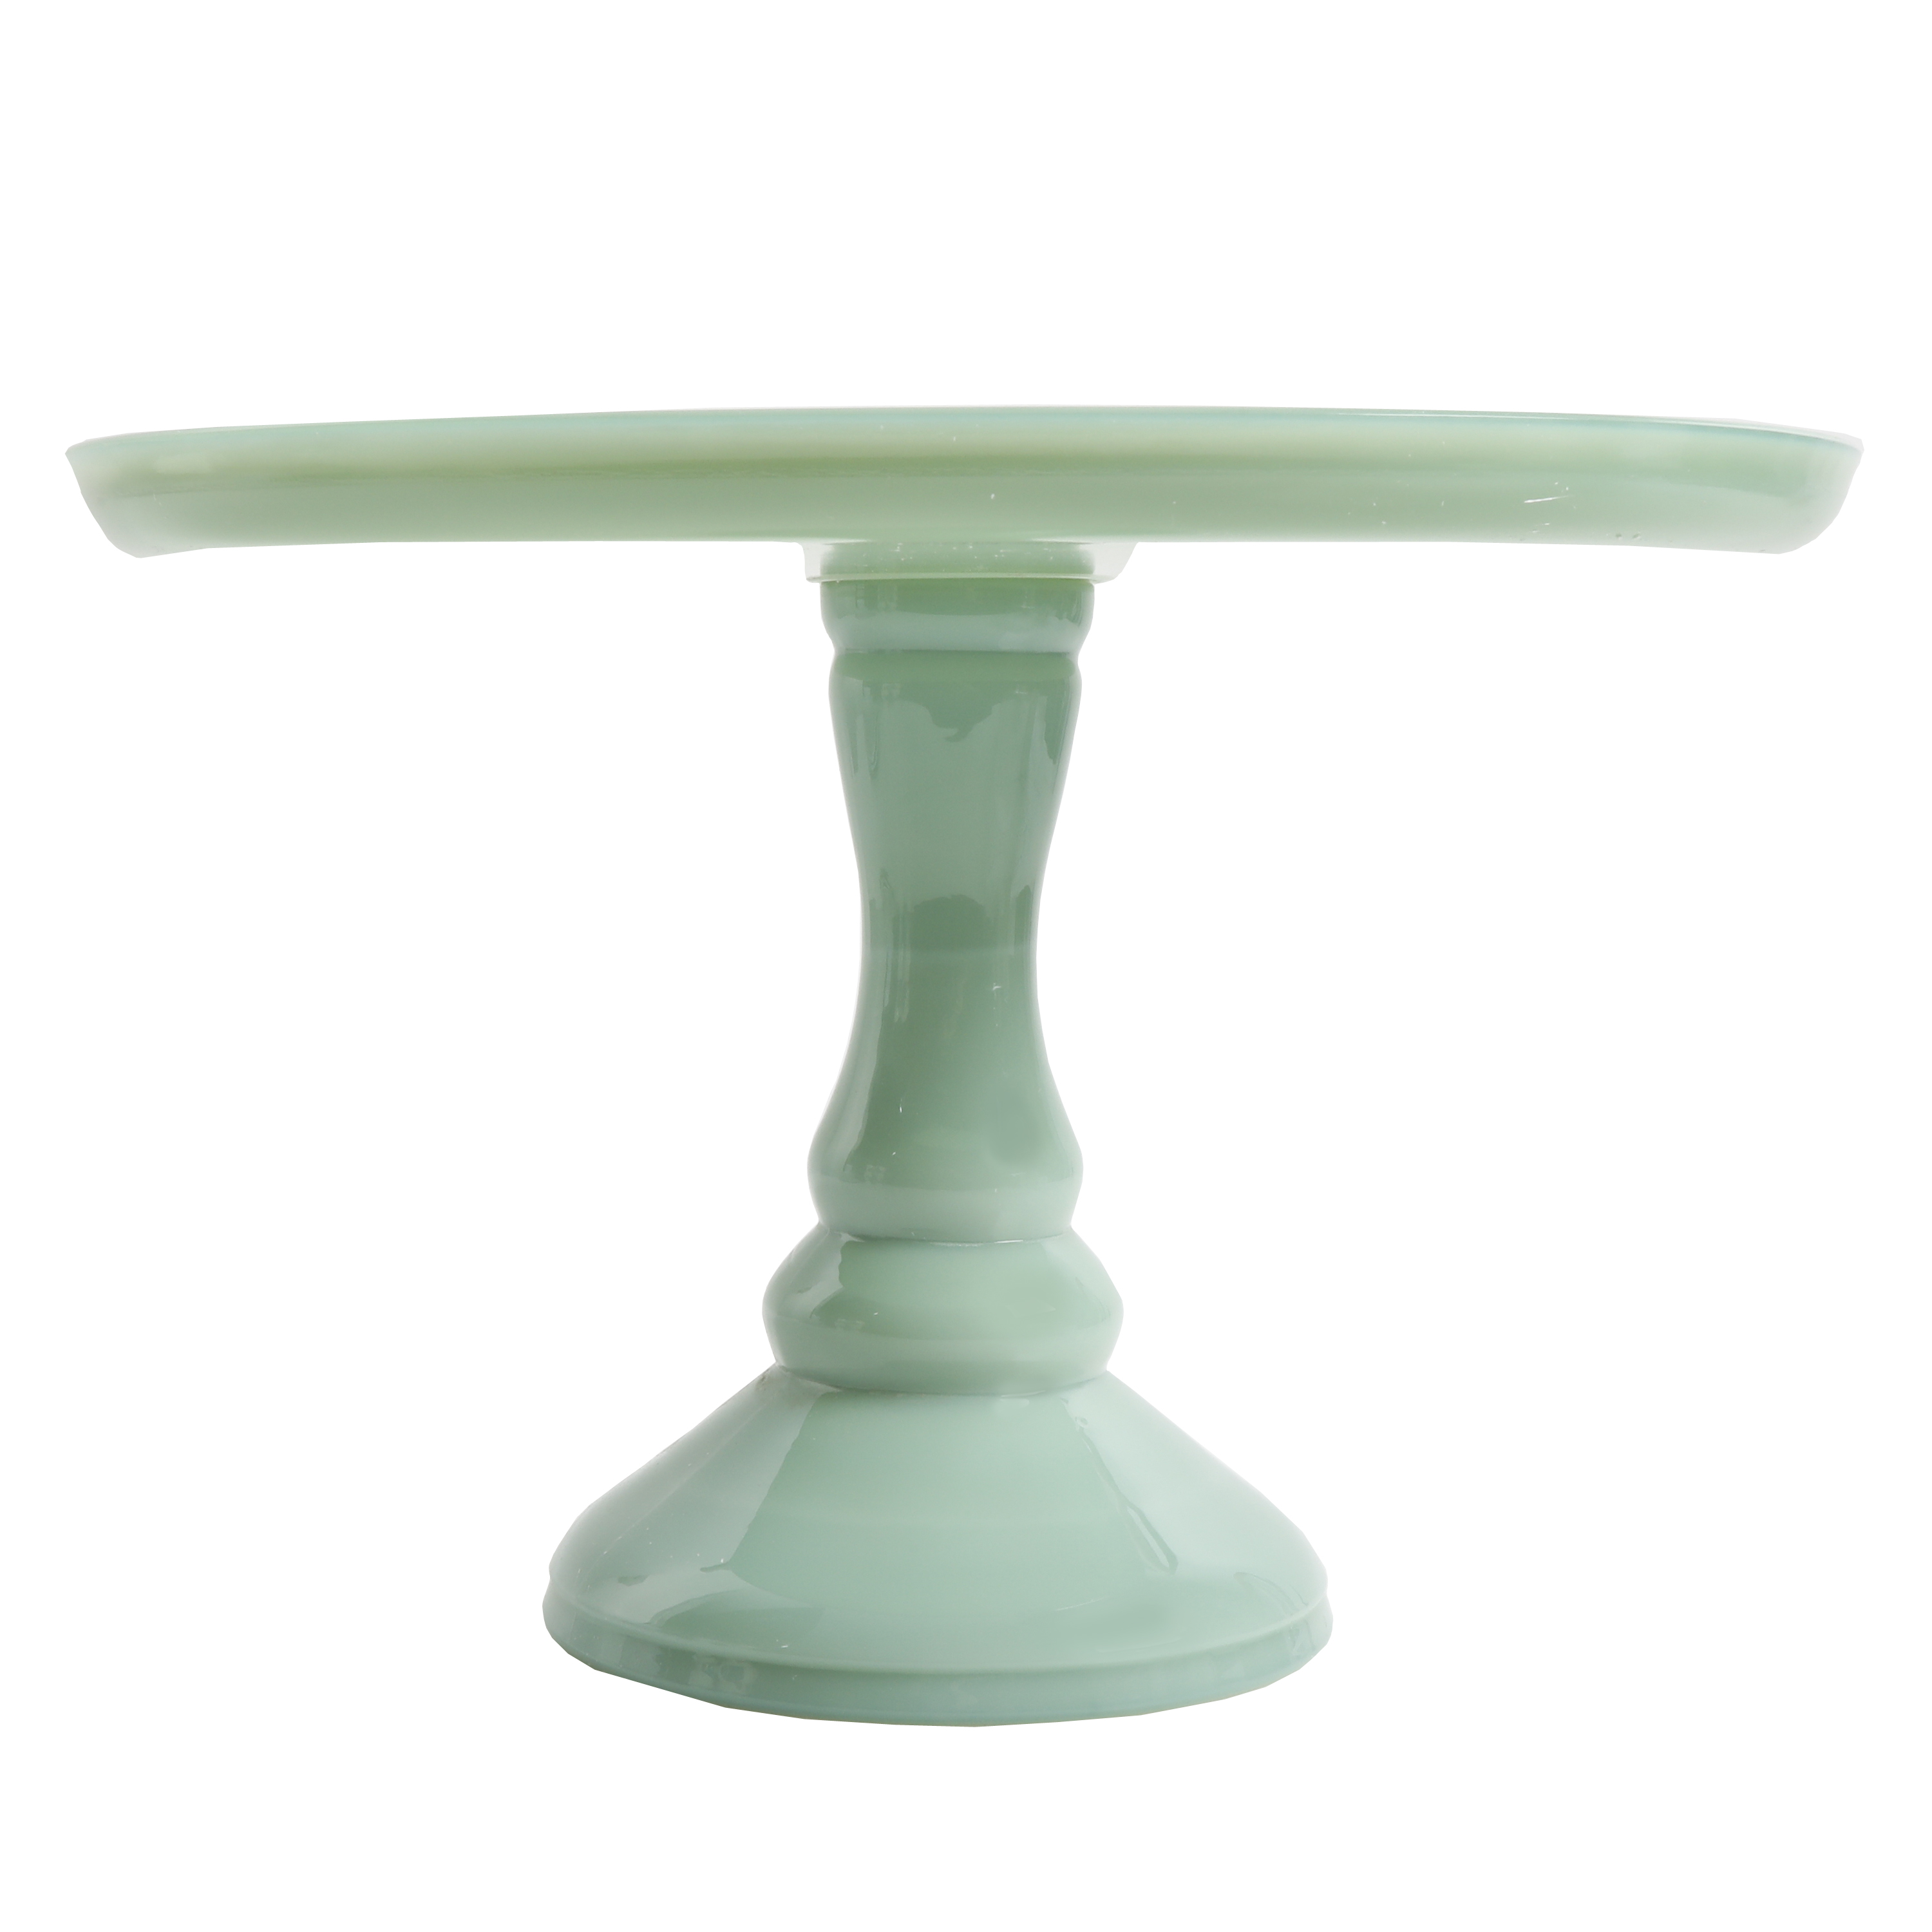 The Pioneer Woman Timeless Beauty 10-inch Cake Stand with Glass Cover, Mint Green - image 2 of 5